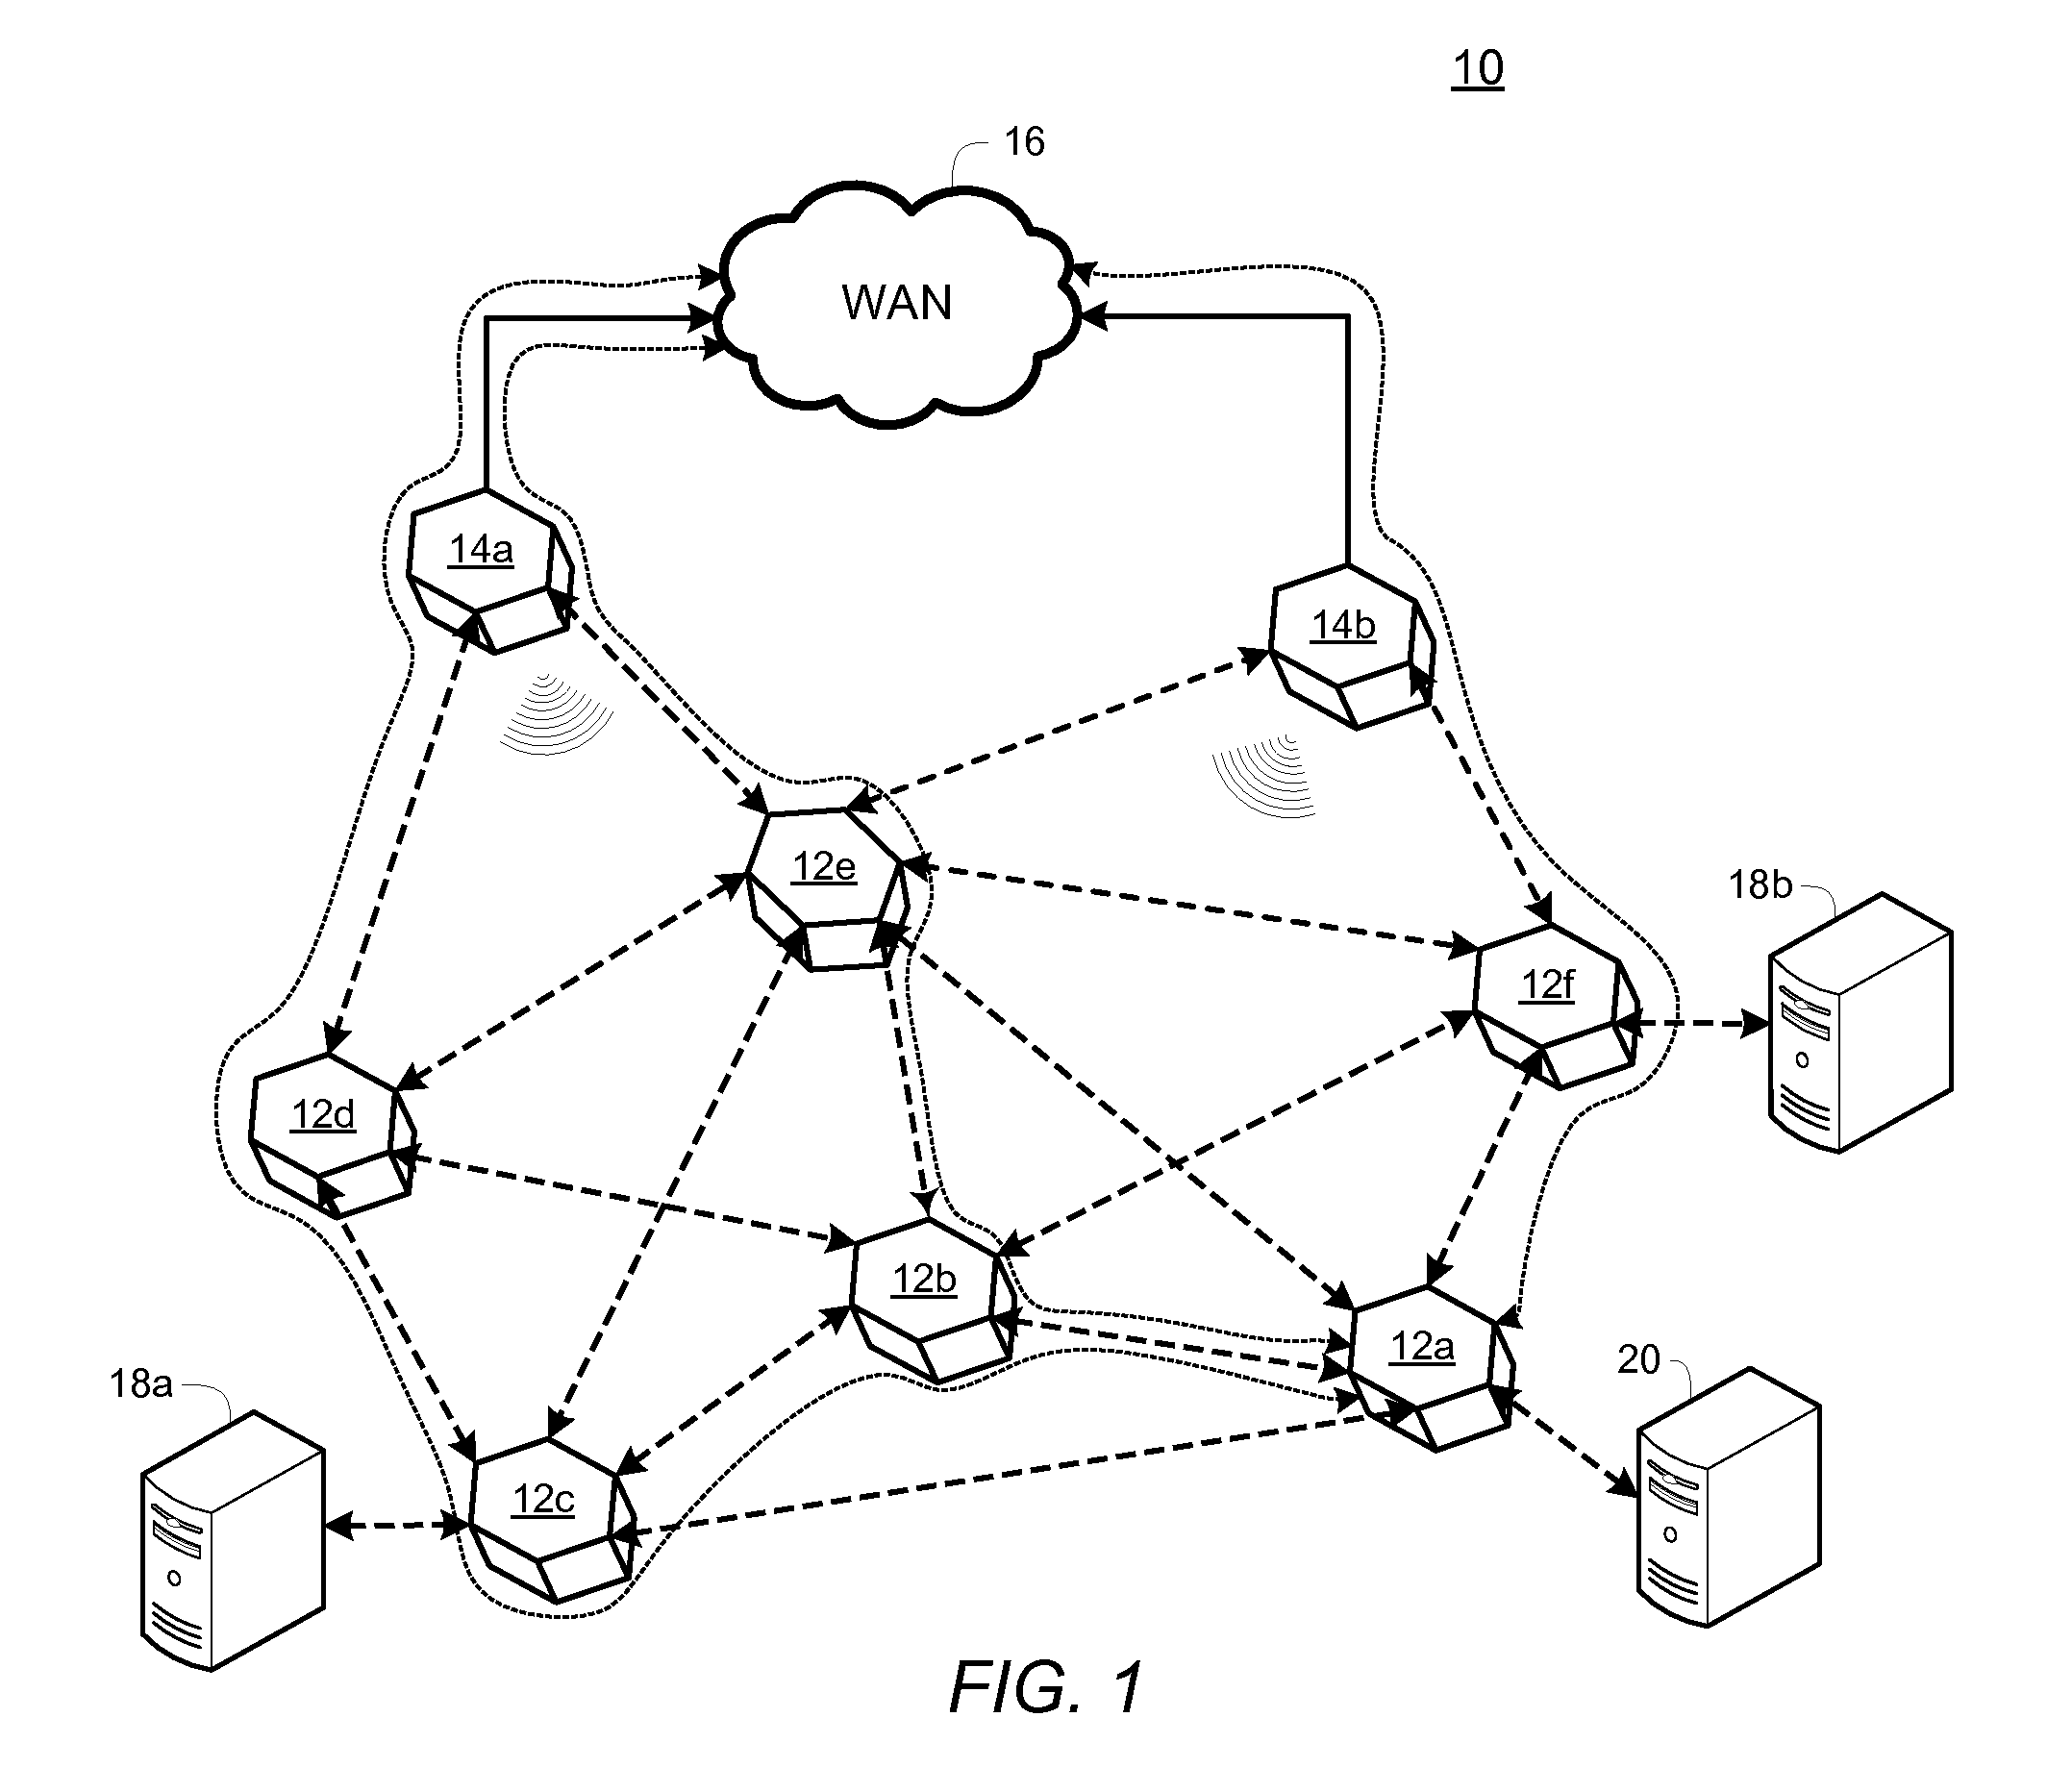 Wireless mesh network transit link topology optimization method and system